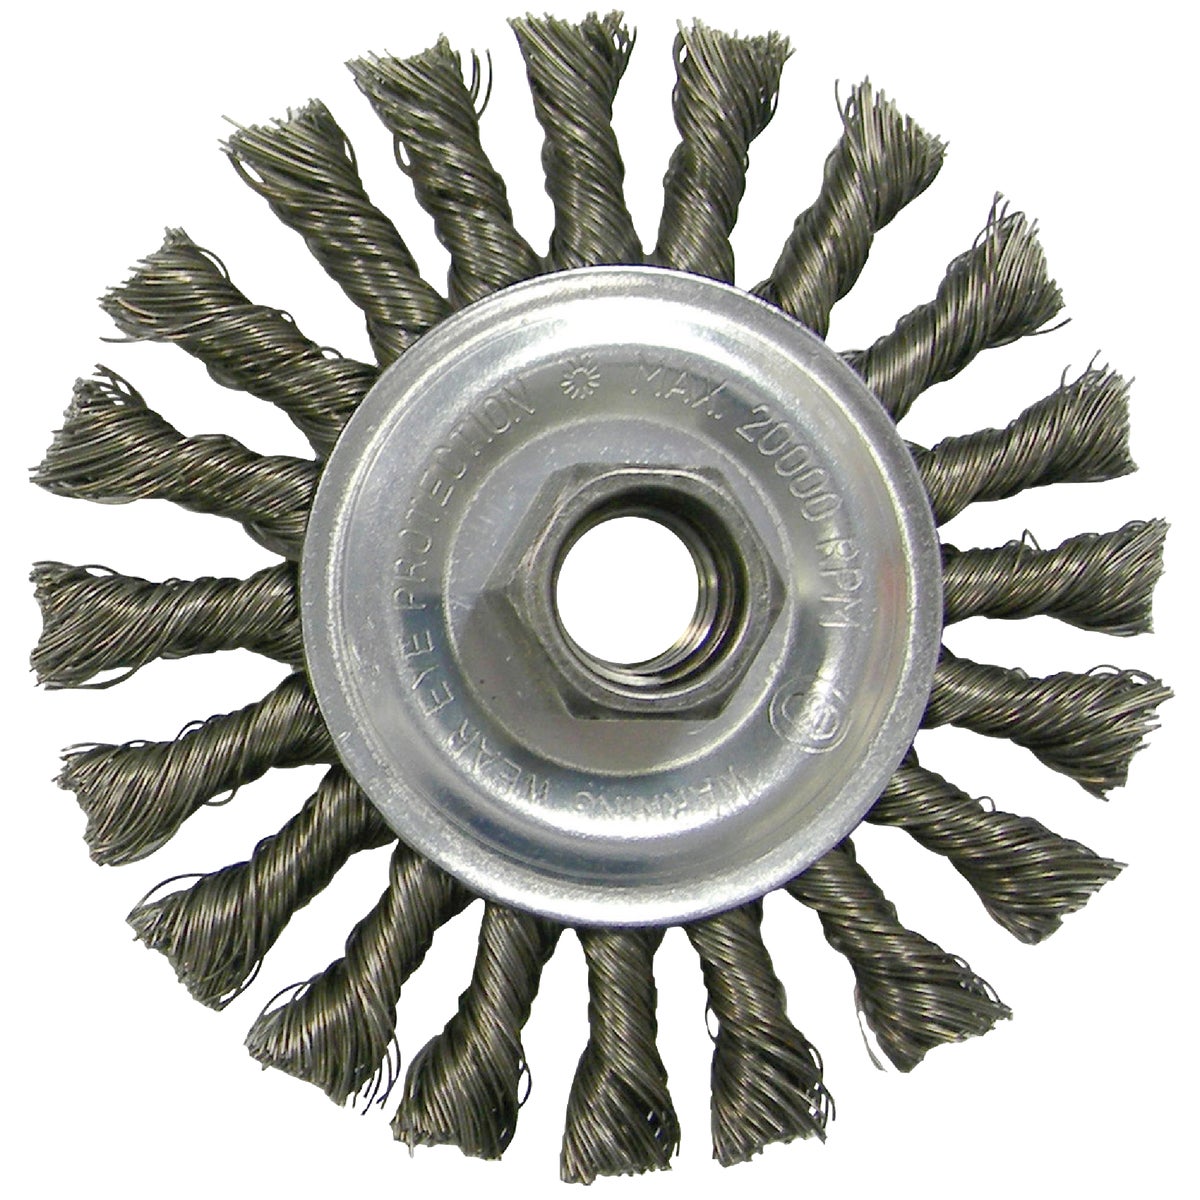 Item 324535, For use on angle grinder.